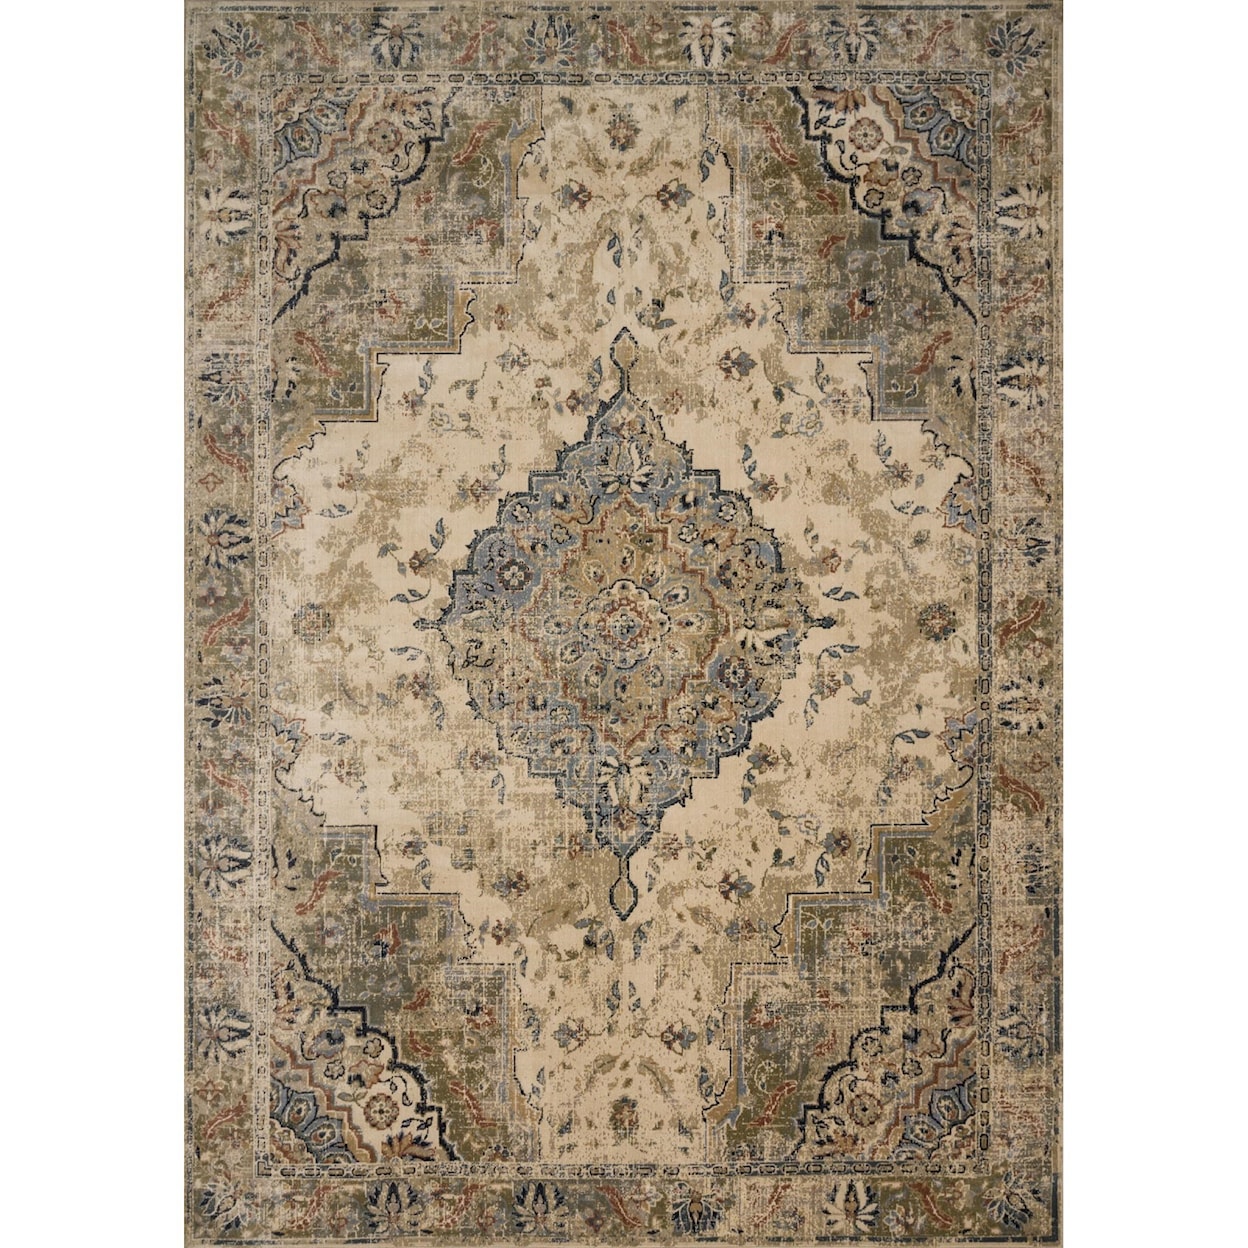 Magnolia Home by Joanna Gaines for Loloi Evie 6'-4" x 9'-2" Rug